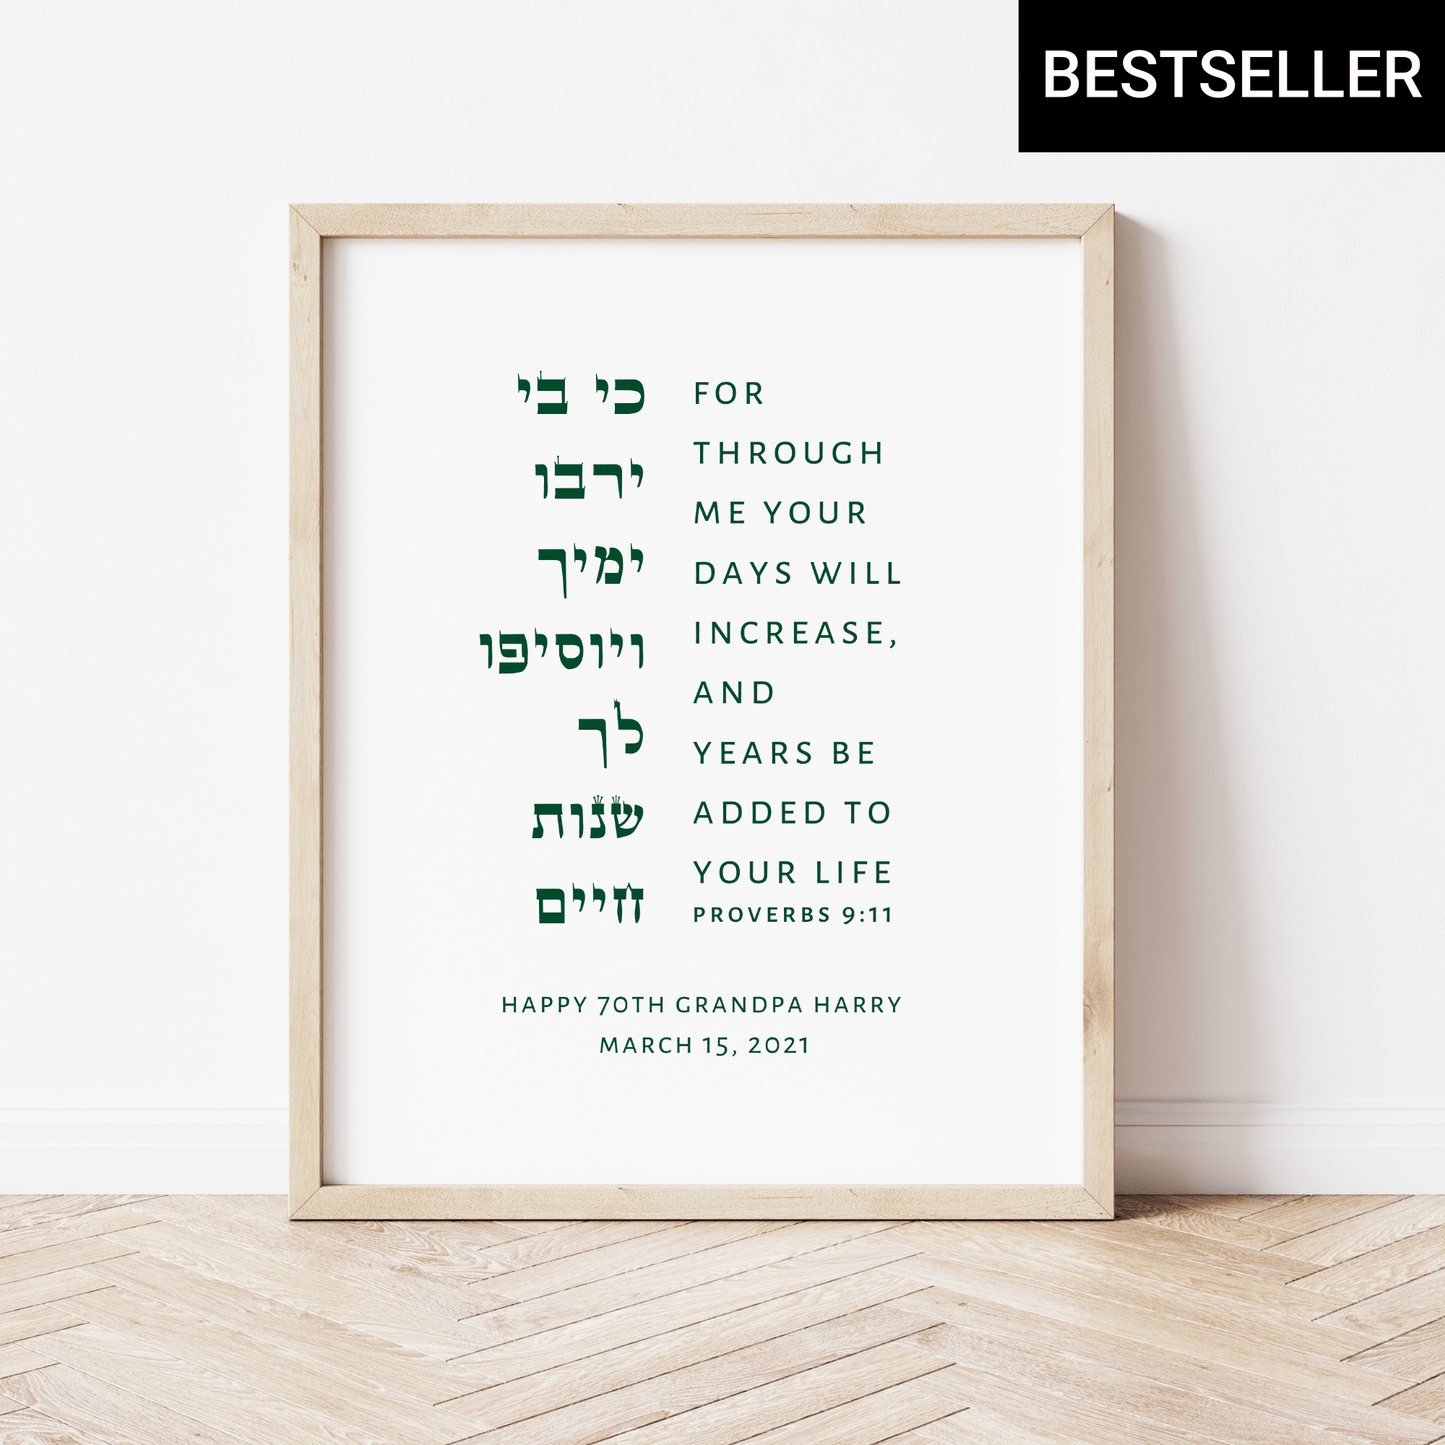 The Verse Proverbs 9:11 Proverbs 9:11 | Bible Verse Wall Art | Personalized Birthday Gift